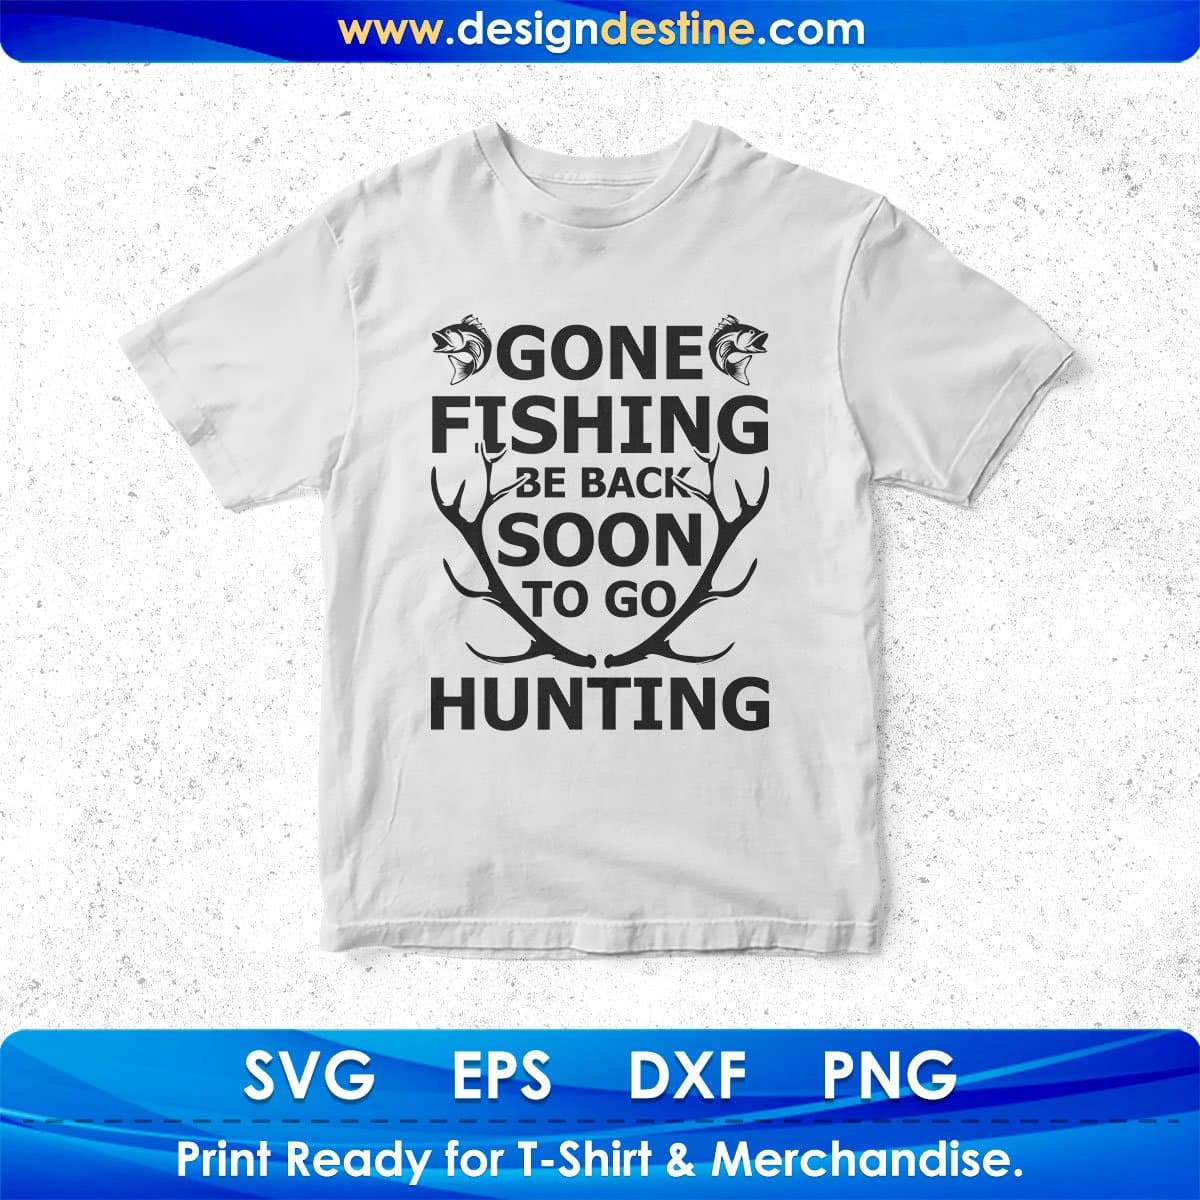 Fishing for woman T-Shirts, Unique Designs